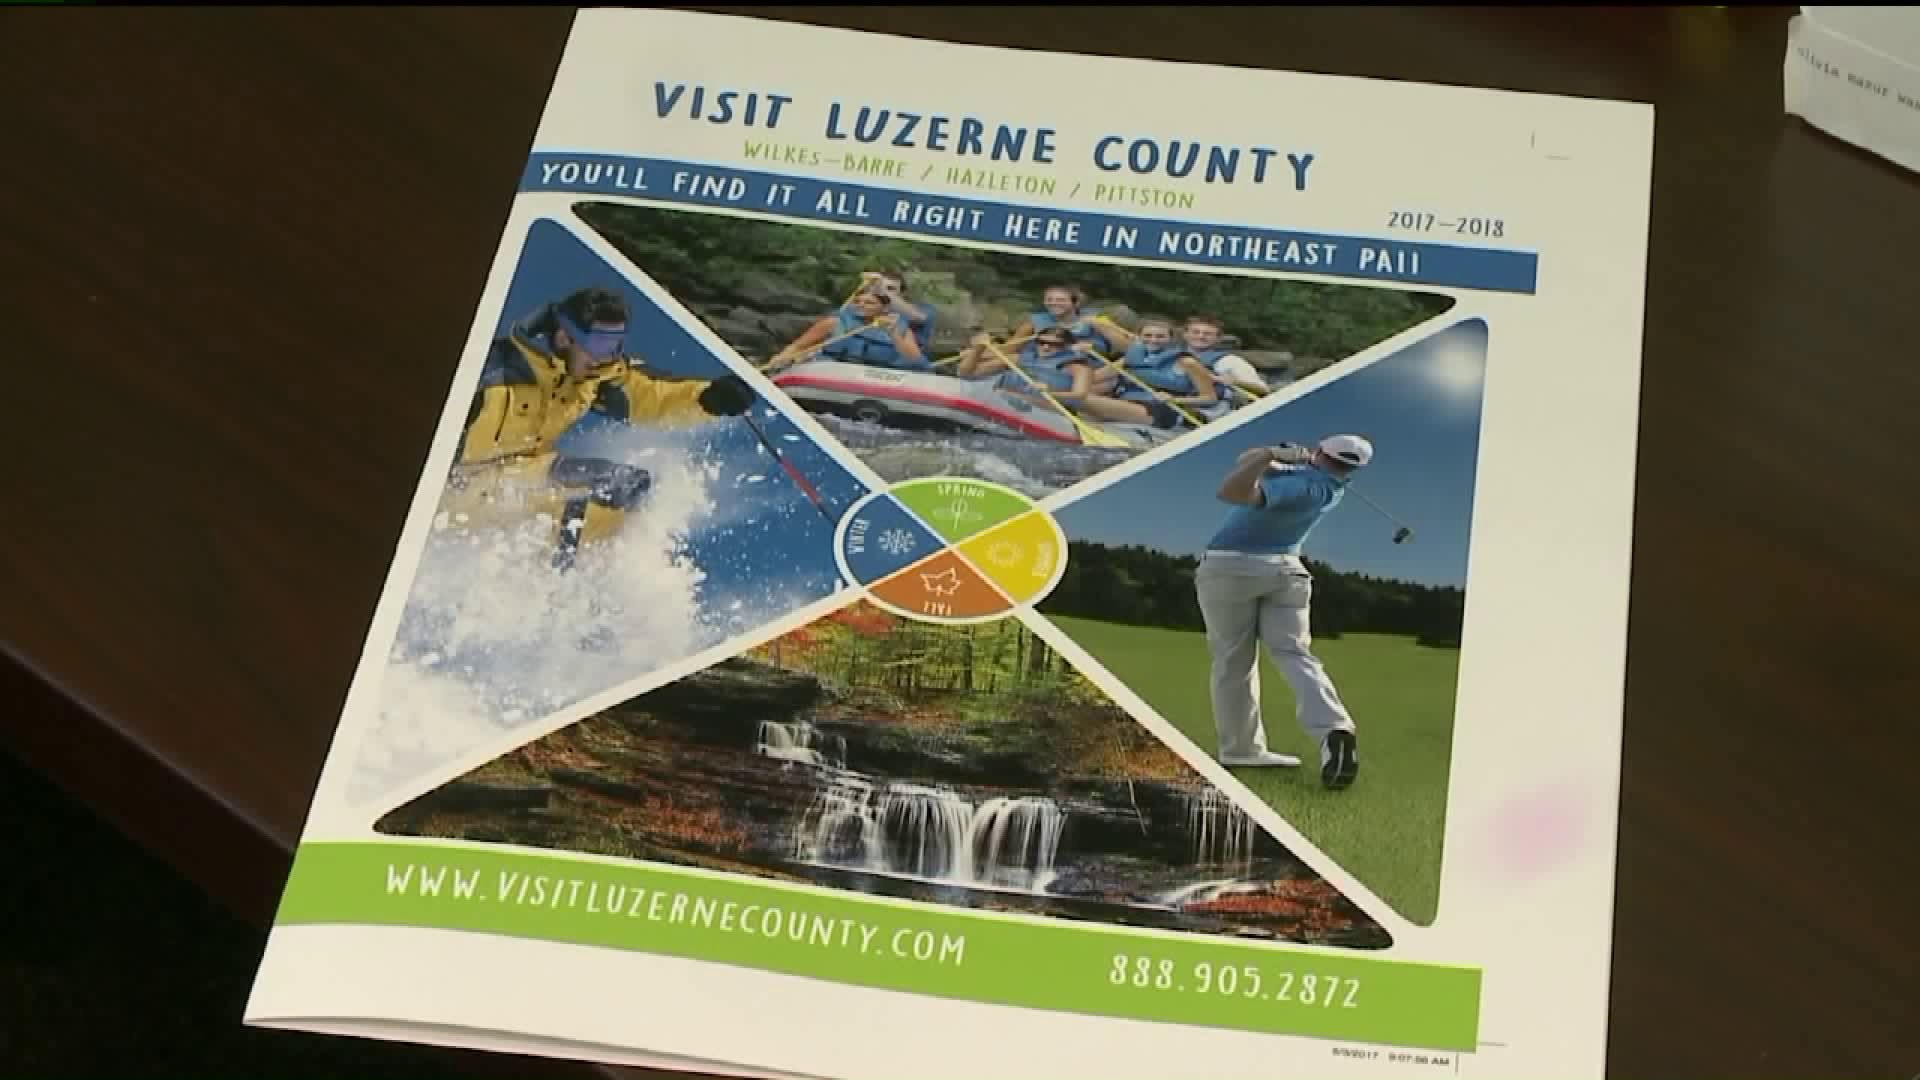 Soaking in Serene Scenes of Luzerne County While Pumping Up Economy